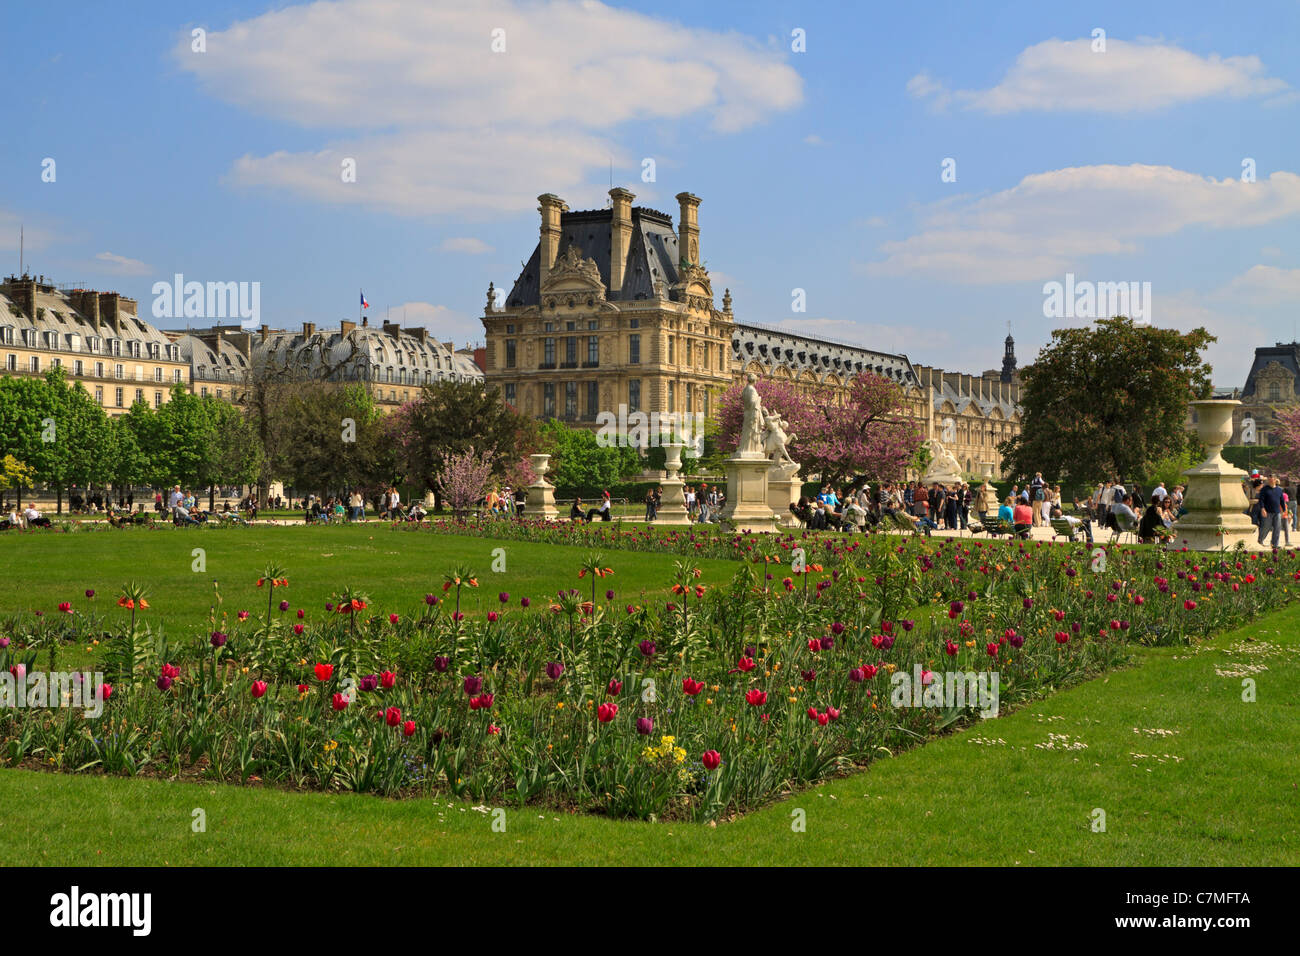 Jardin de Tuileries, Paris. Spring flowers in the formal gardens that stretch between the Louvre and the Place de la Concorde Stock Photo